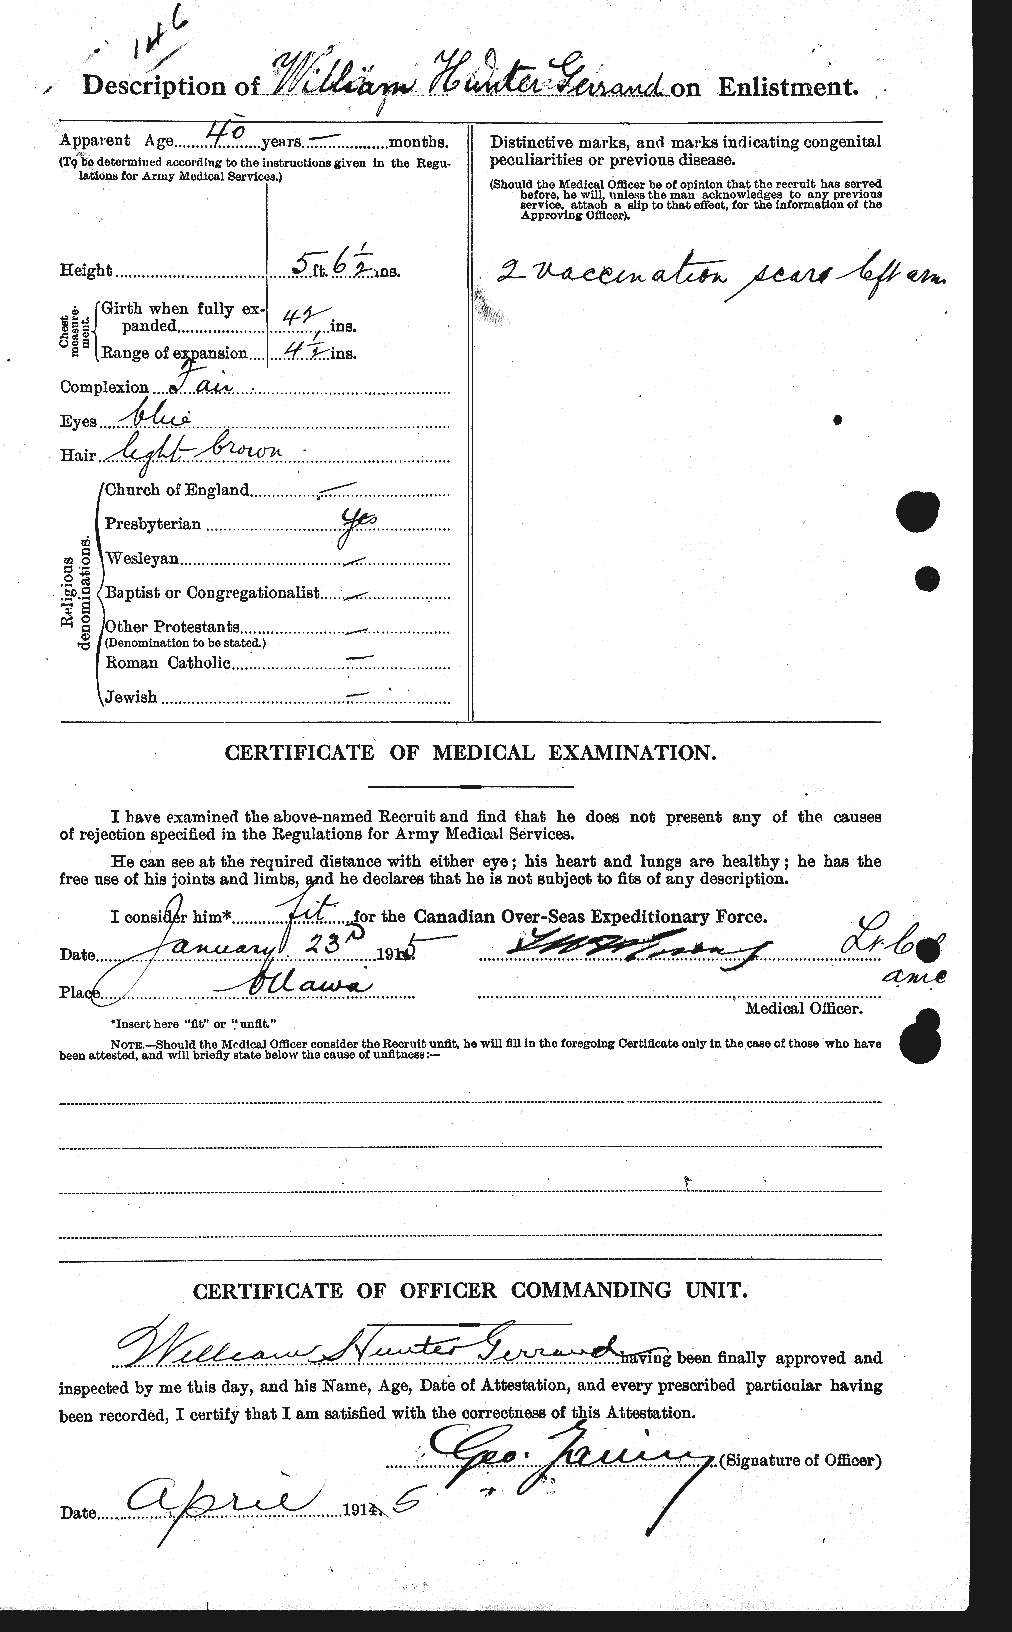 Personnel Records of the First World War - CEF 344233b